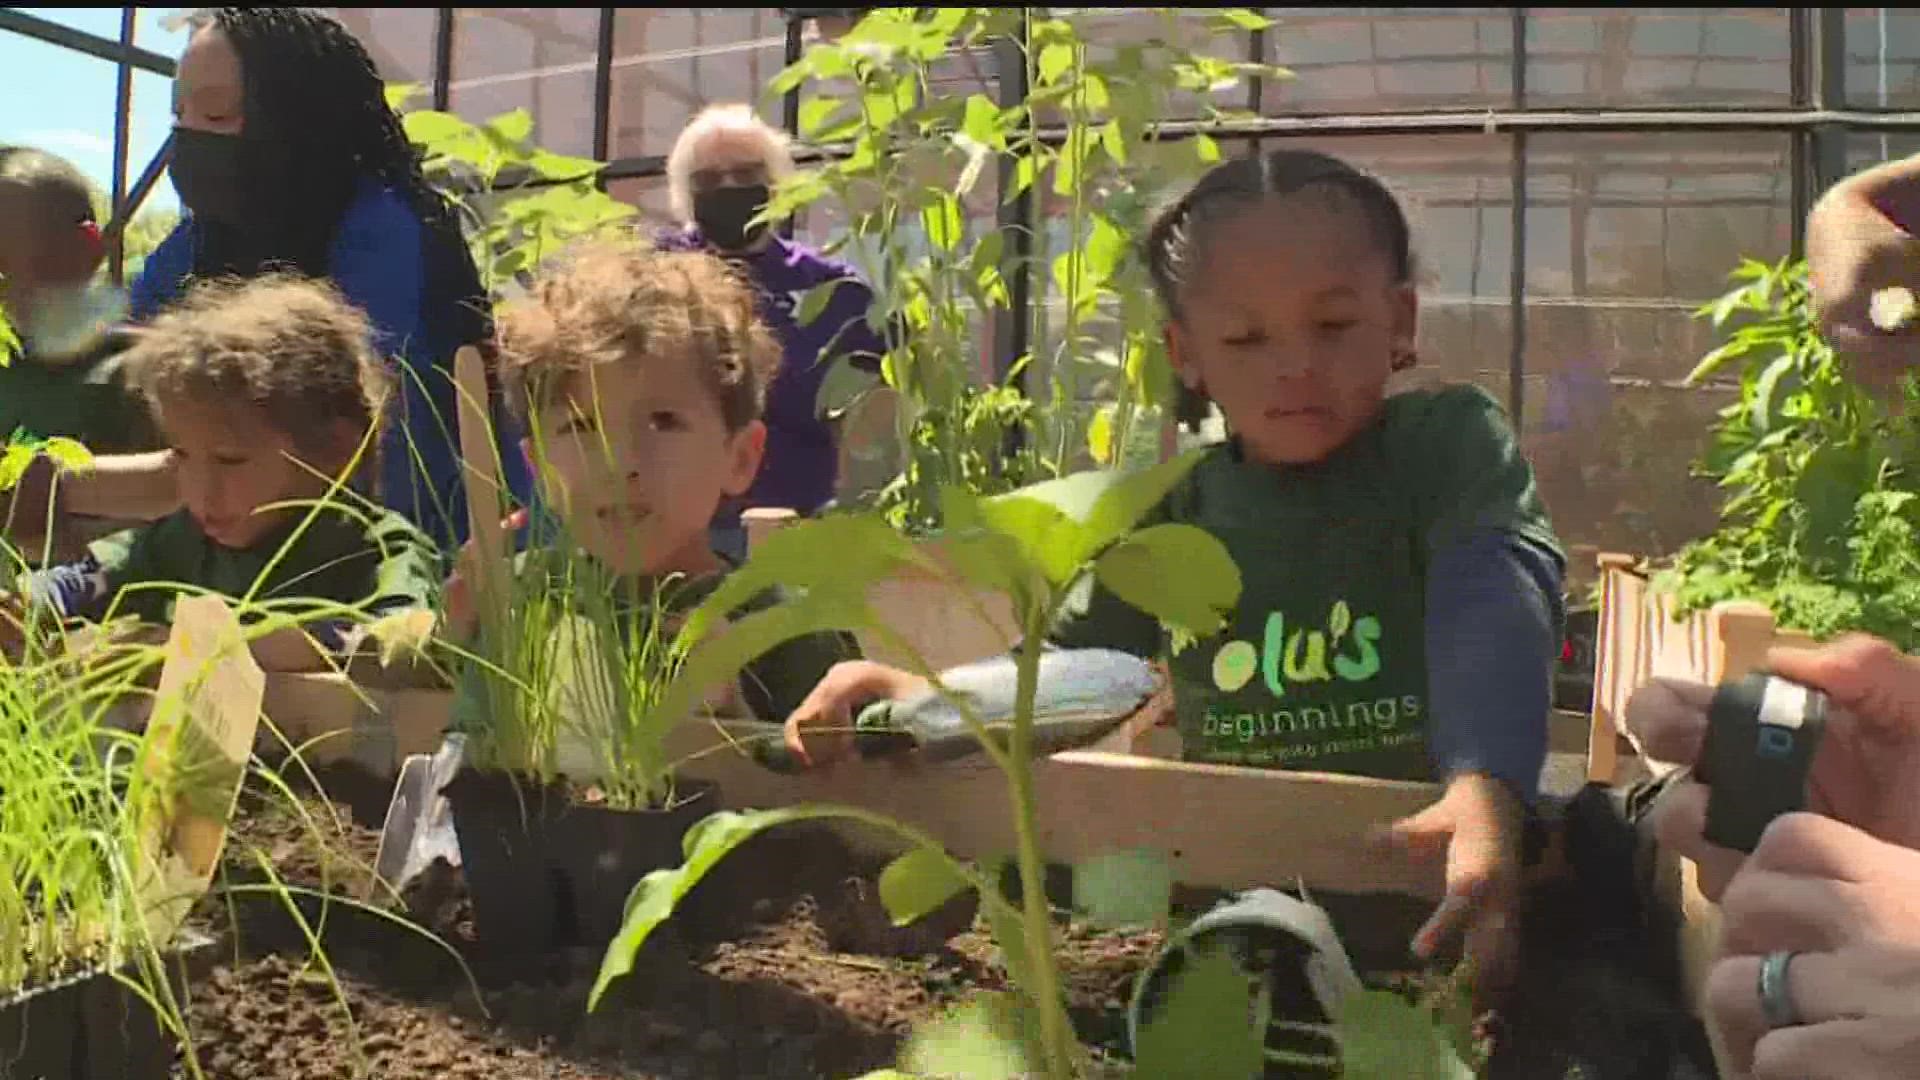 Nearly 150 kids from preschool to high school participate in the weekly gardening and healthy eating programs at the North Minneapolis Community YMCA.